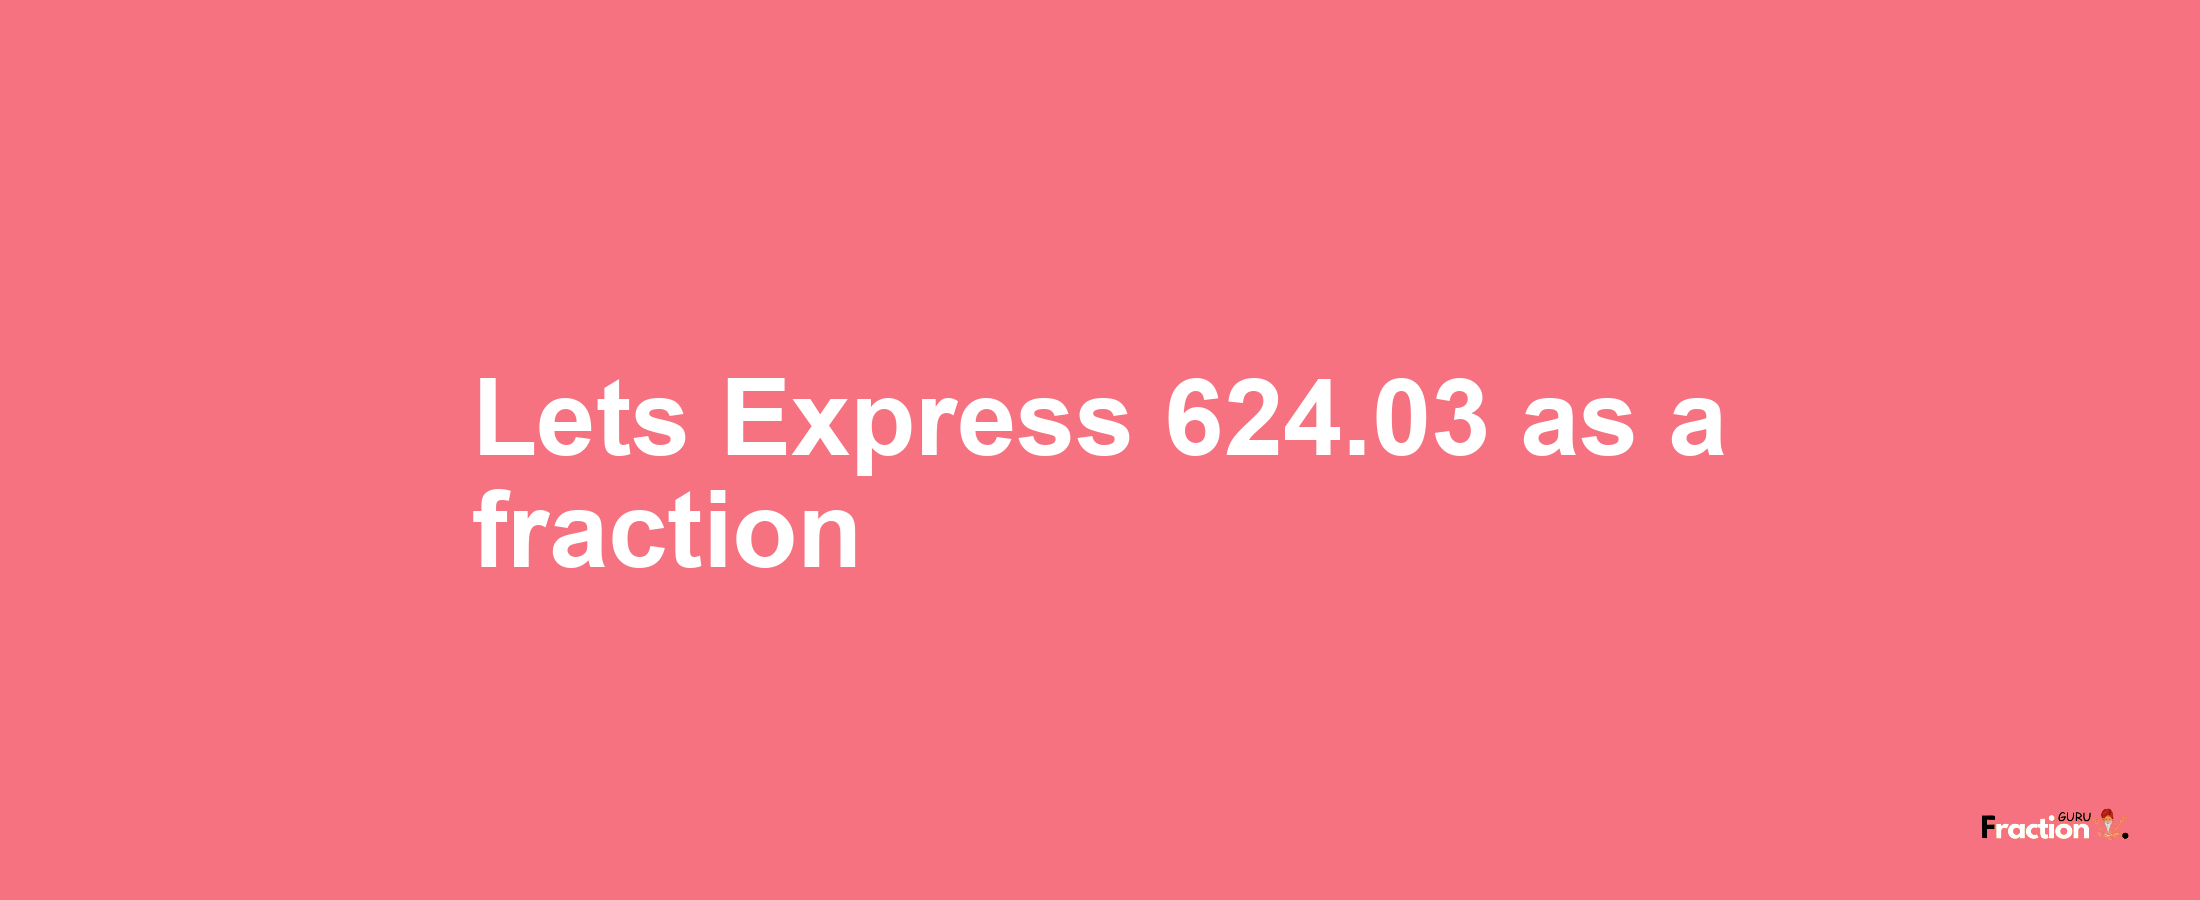 Lets Express 624.03 as afraction